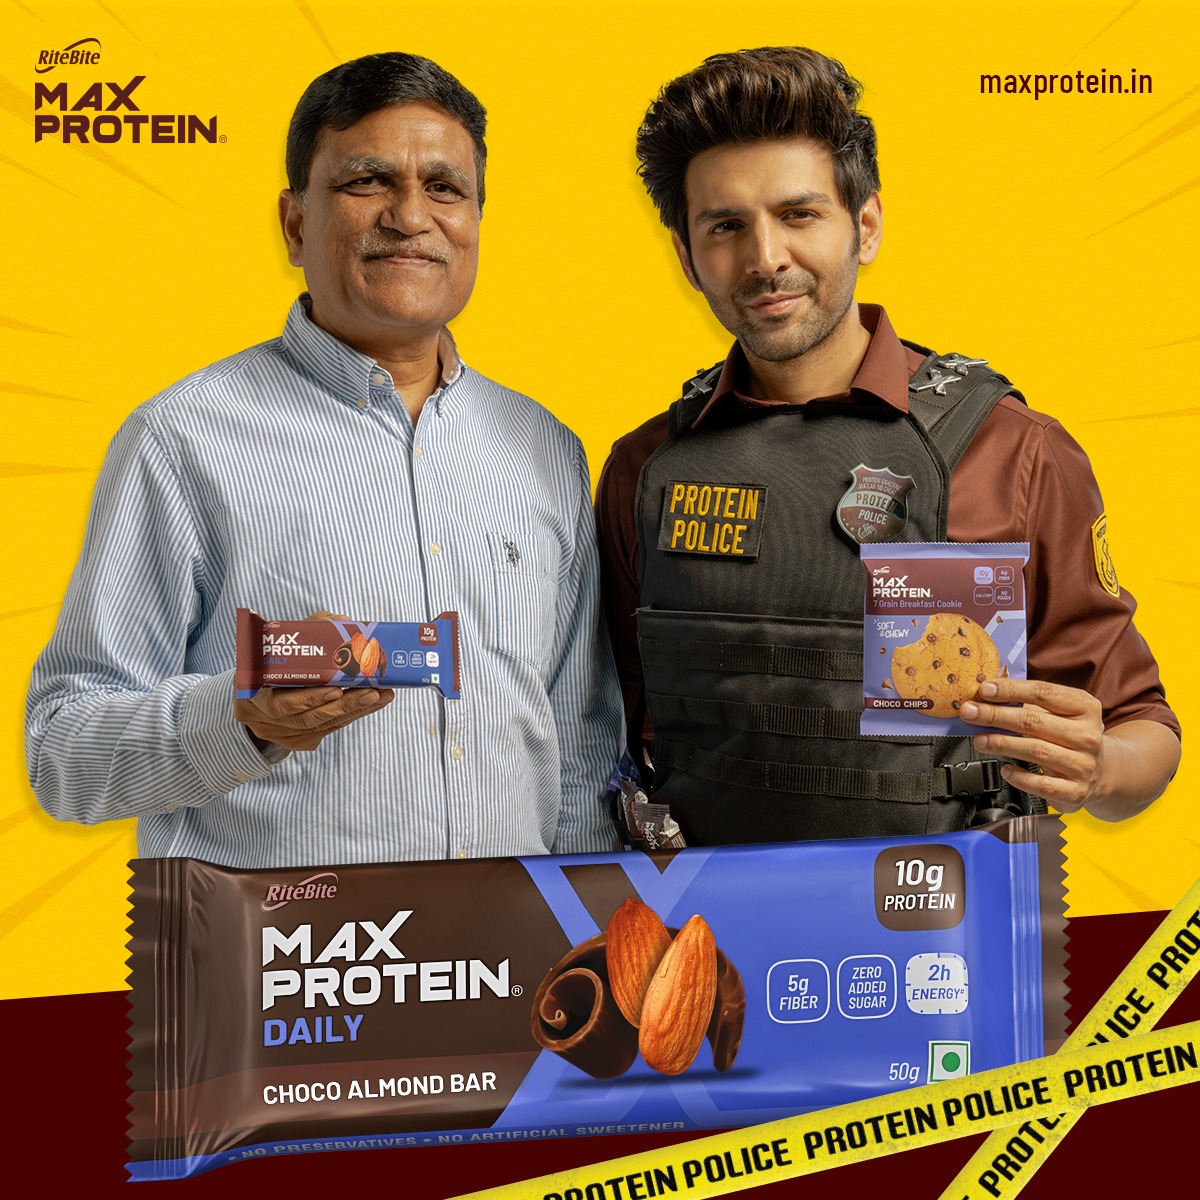 Max Protein joins forces with Kartik Aaryan to create the ultimate ‘Protein Police’ squad!